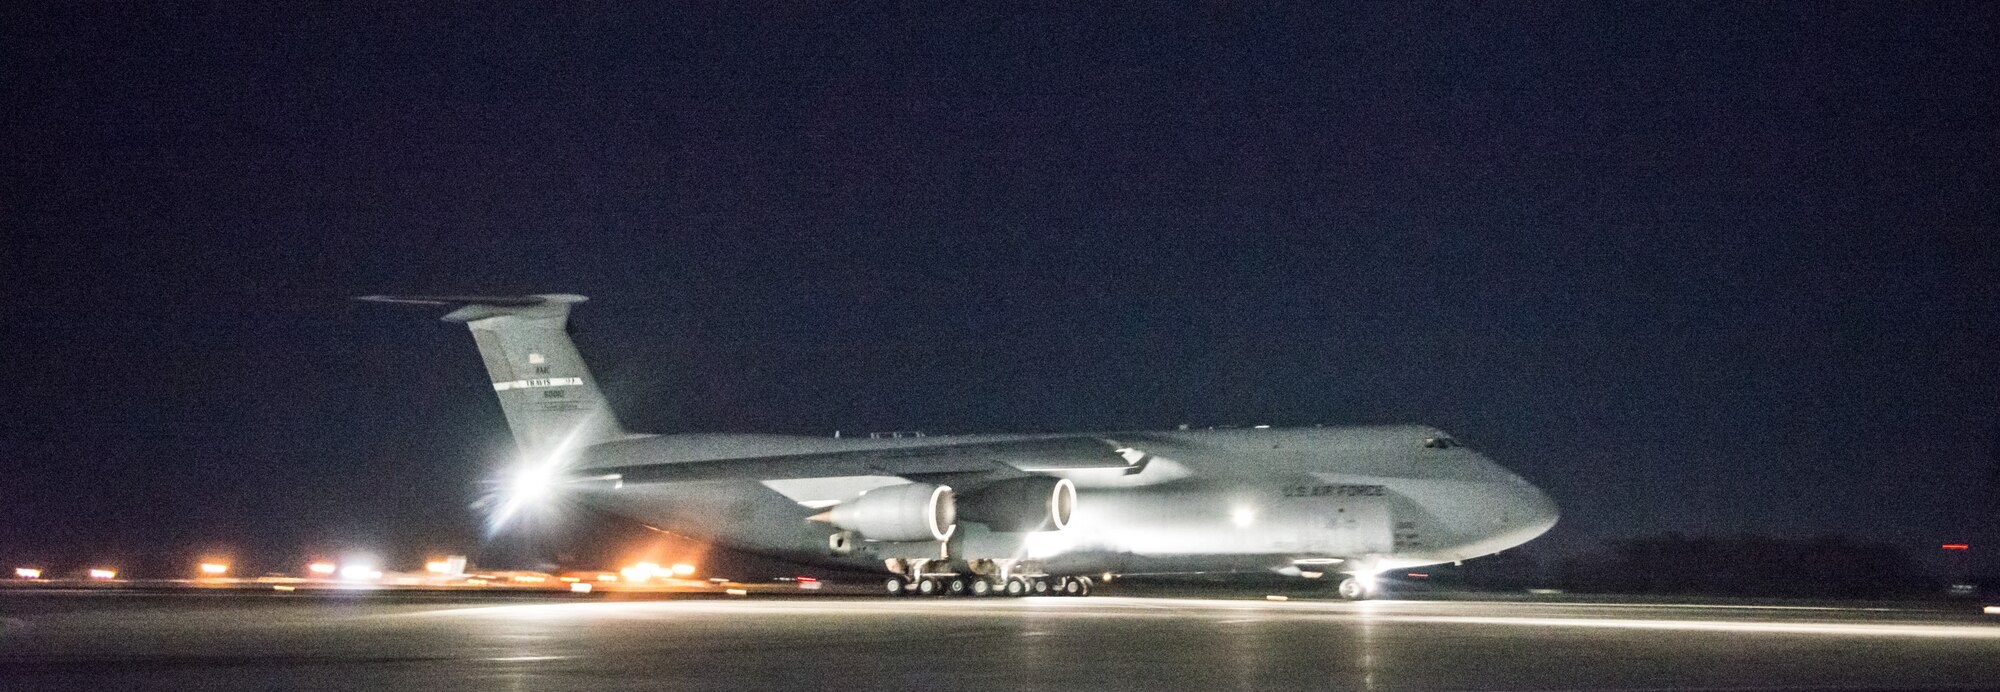 A C-5M Super Galaxy from the 22nd Airlift Squadron takes off from Travis AFB, California early April 3, 2015. The flight, which lasted approximately one hour, claimed 45 aeronautical records, positioning the U.S. military's largest airframe as the world's top aviation record holder with a total of 86 world records. (U.S. Air Force photo/Ken Wright)